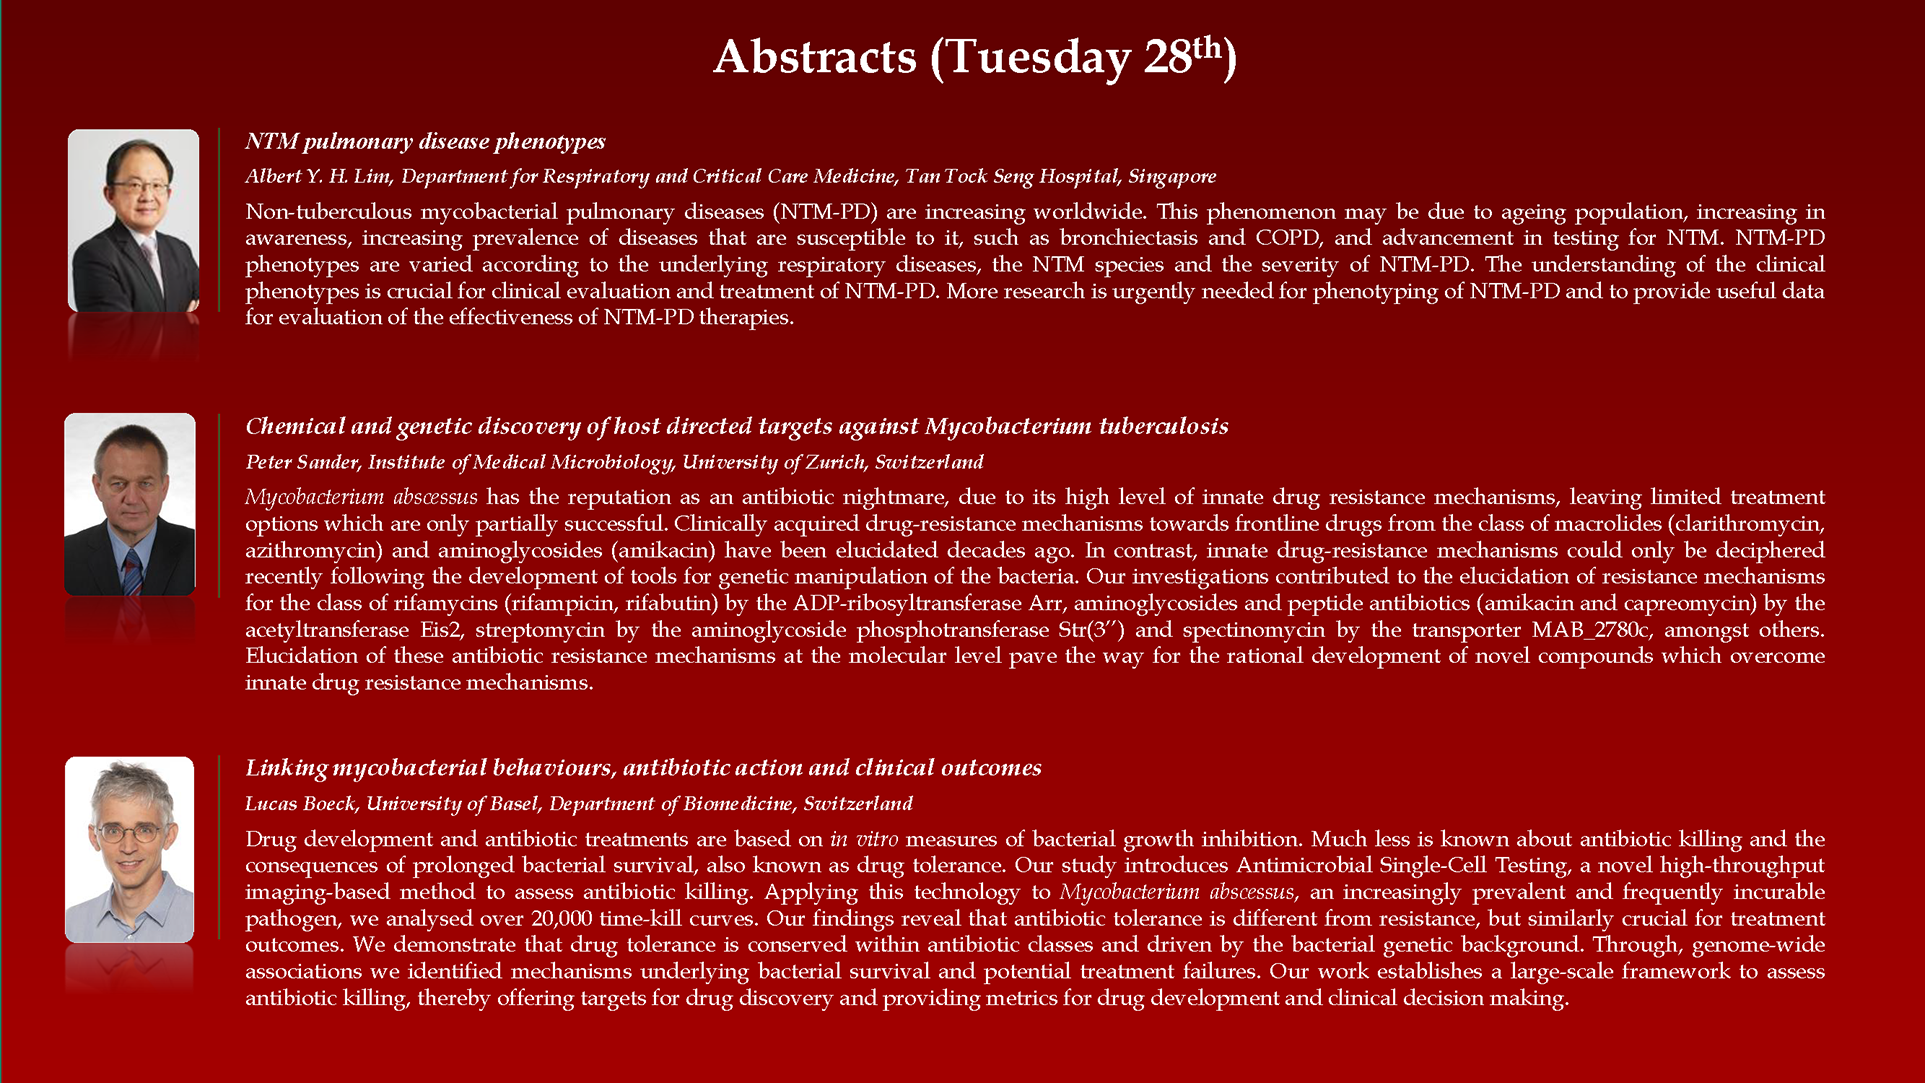 Abstracts of Day 2 (28th May) - 1 0f 3